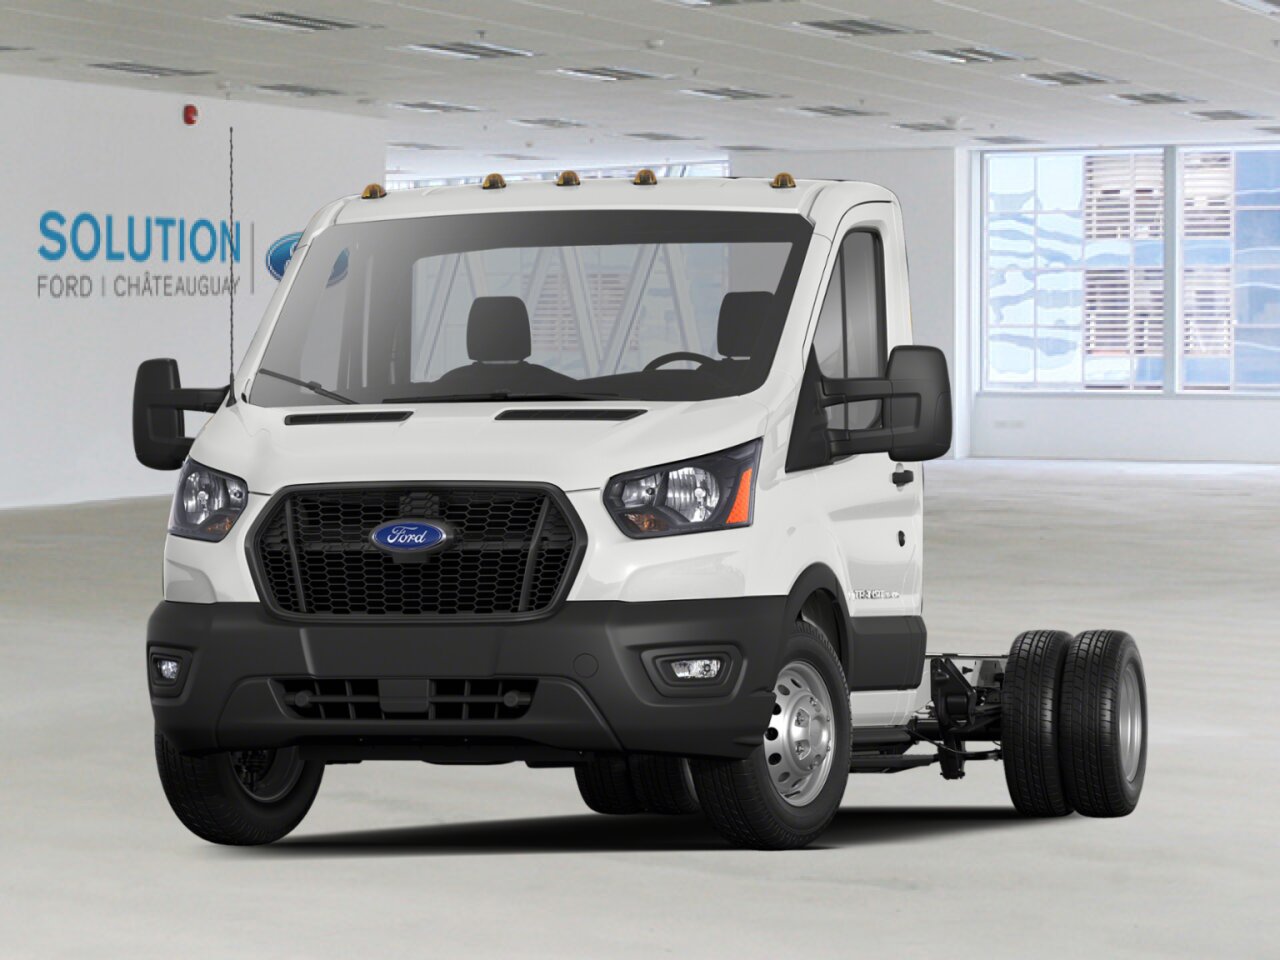 2023 FORD Transit Chassis Cab Châteauguay - photo #0